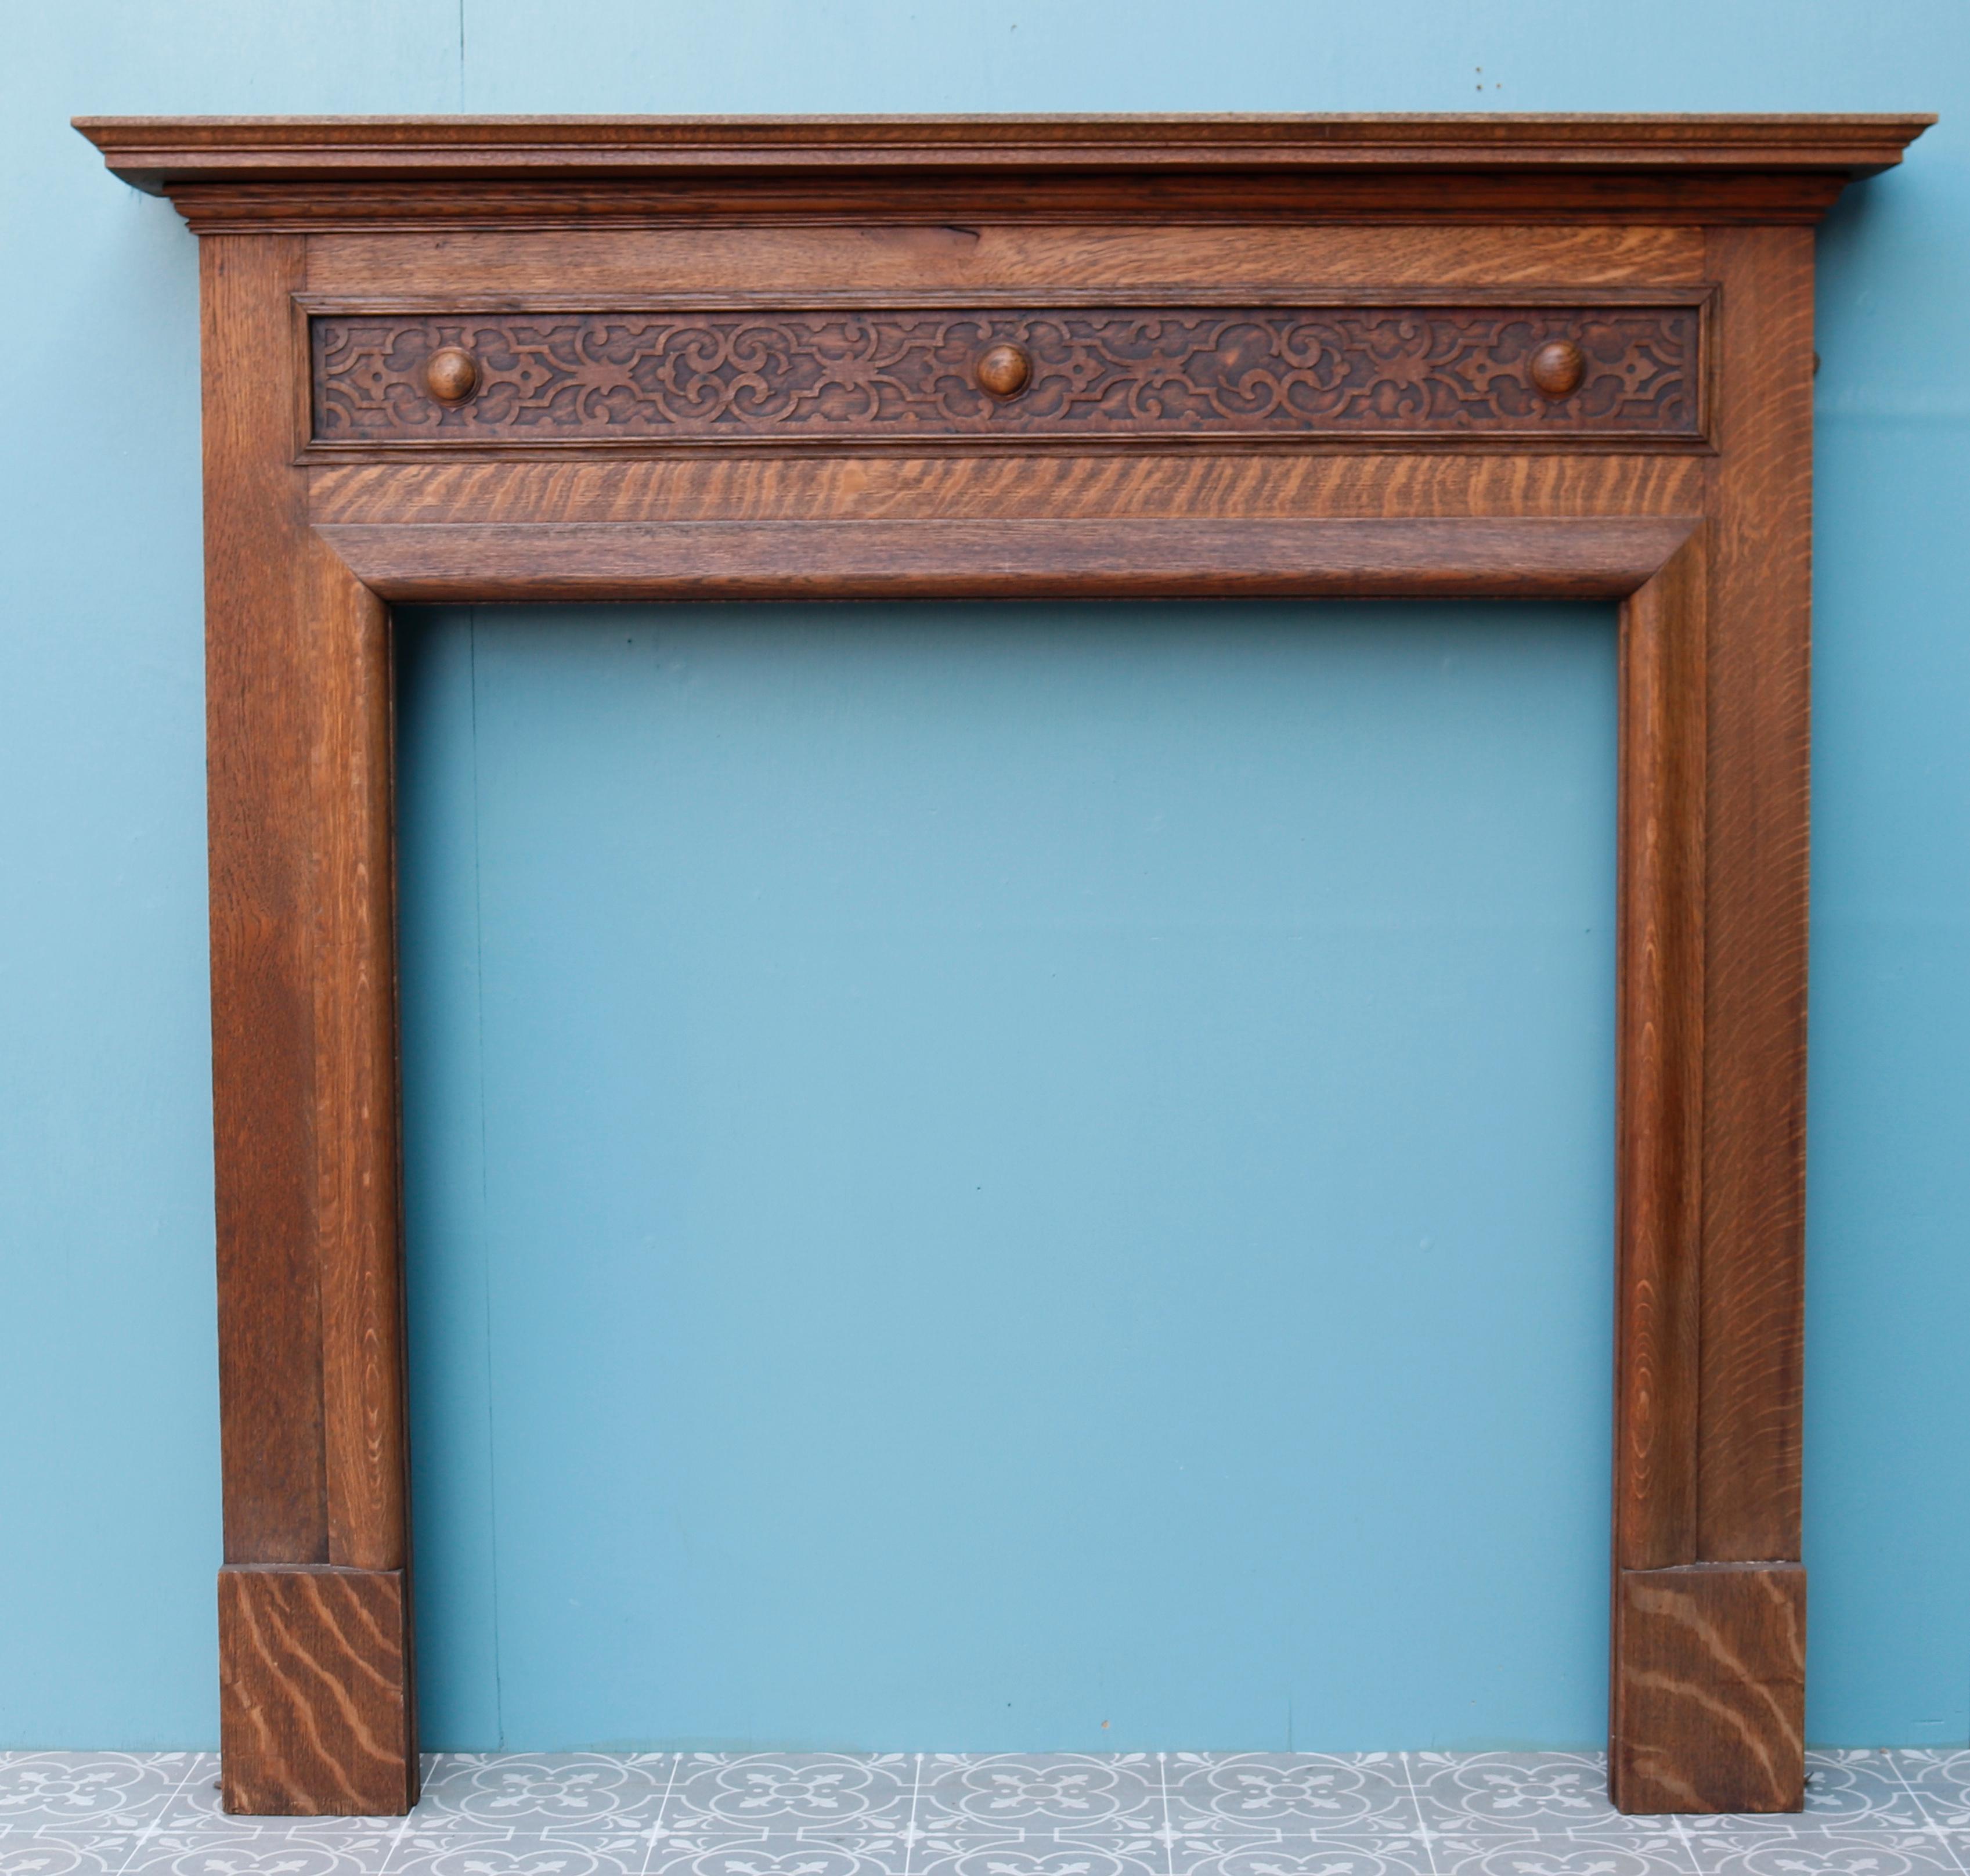 An antique oak fire surround with a carved frieze in the Arts and Crafts style.

Additional dimensions 

Opening height 96 cm

Opening width 95 cm

Width between outsides of the foot blocks 125.5 cm.